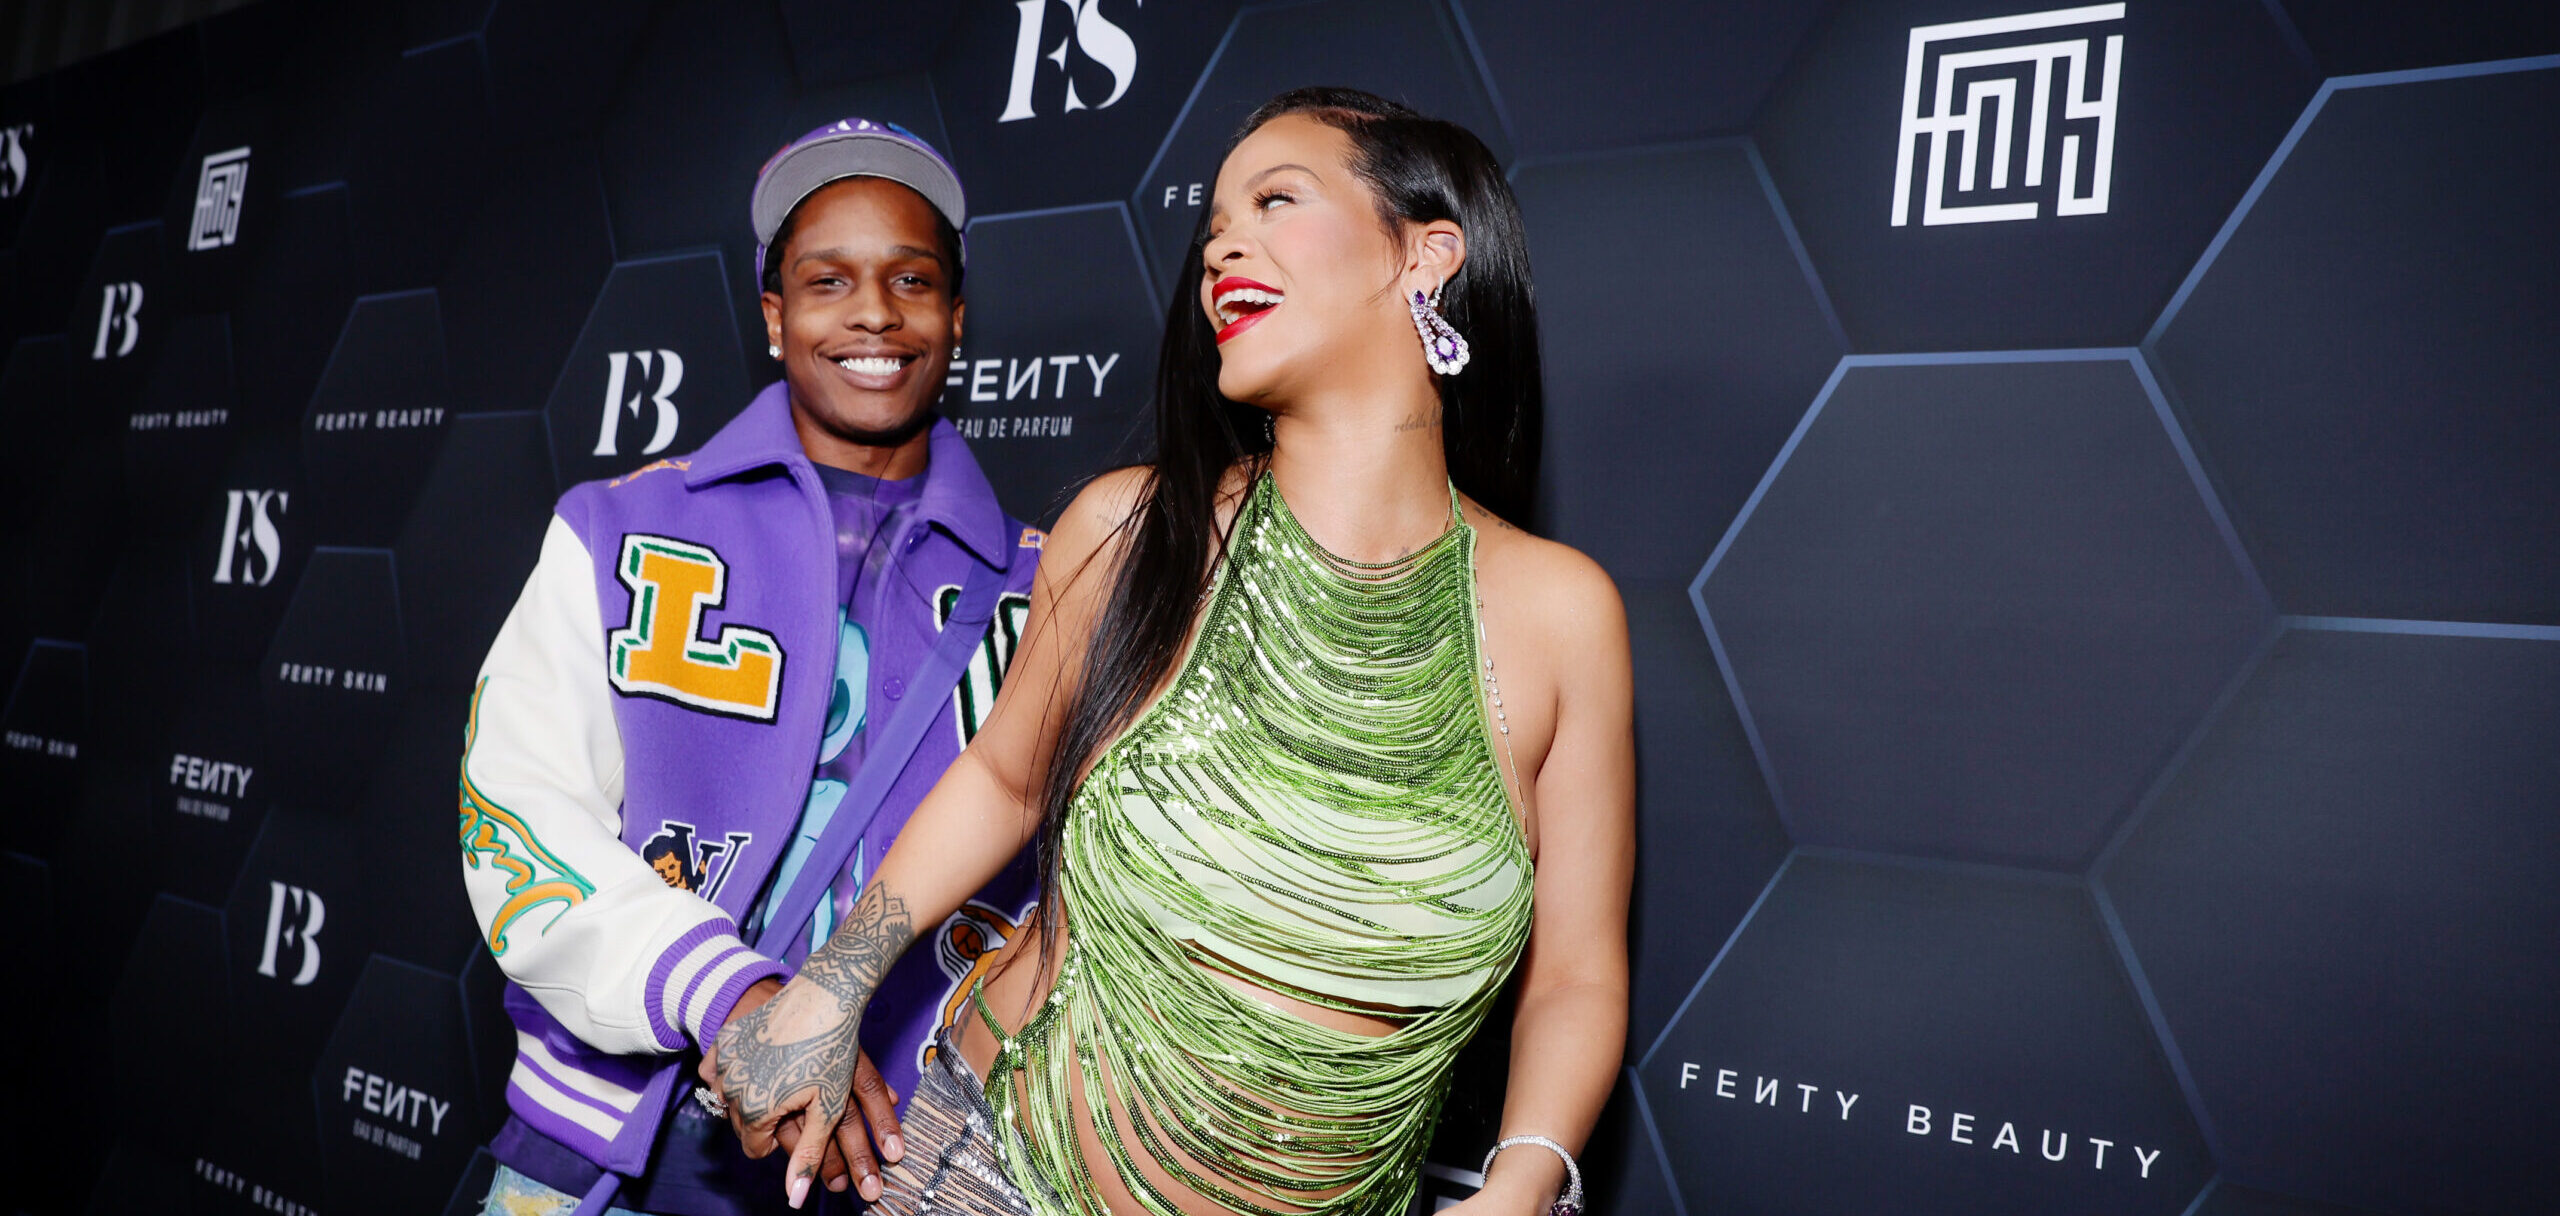 The $52,000 Charm Bracelet A$AP Rocky Gifted Rihanna May Give A Hint About Her Due Date